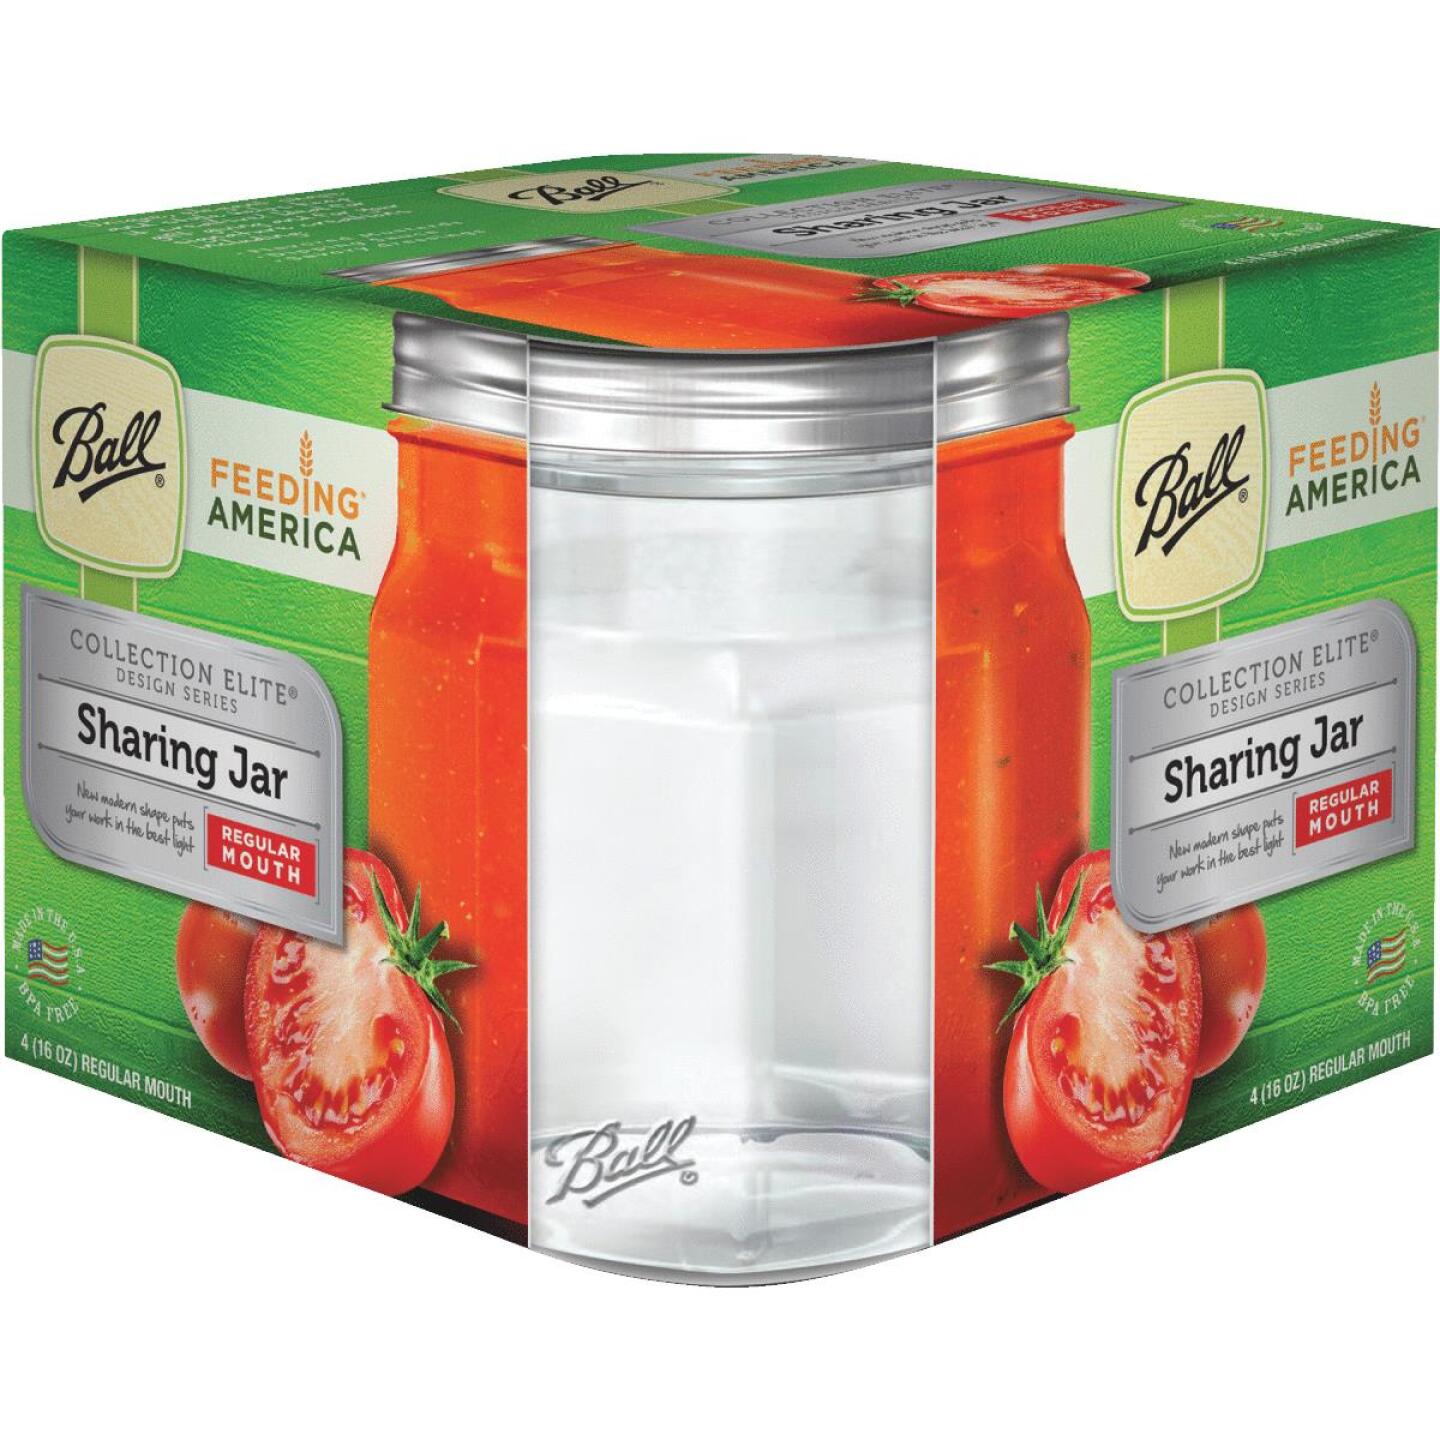 Ball, Ball Collection Elite 1 Pint Regular Mouth Sharing Canning Jar (4-Count)